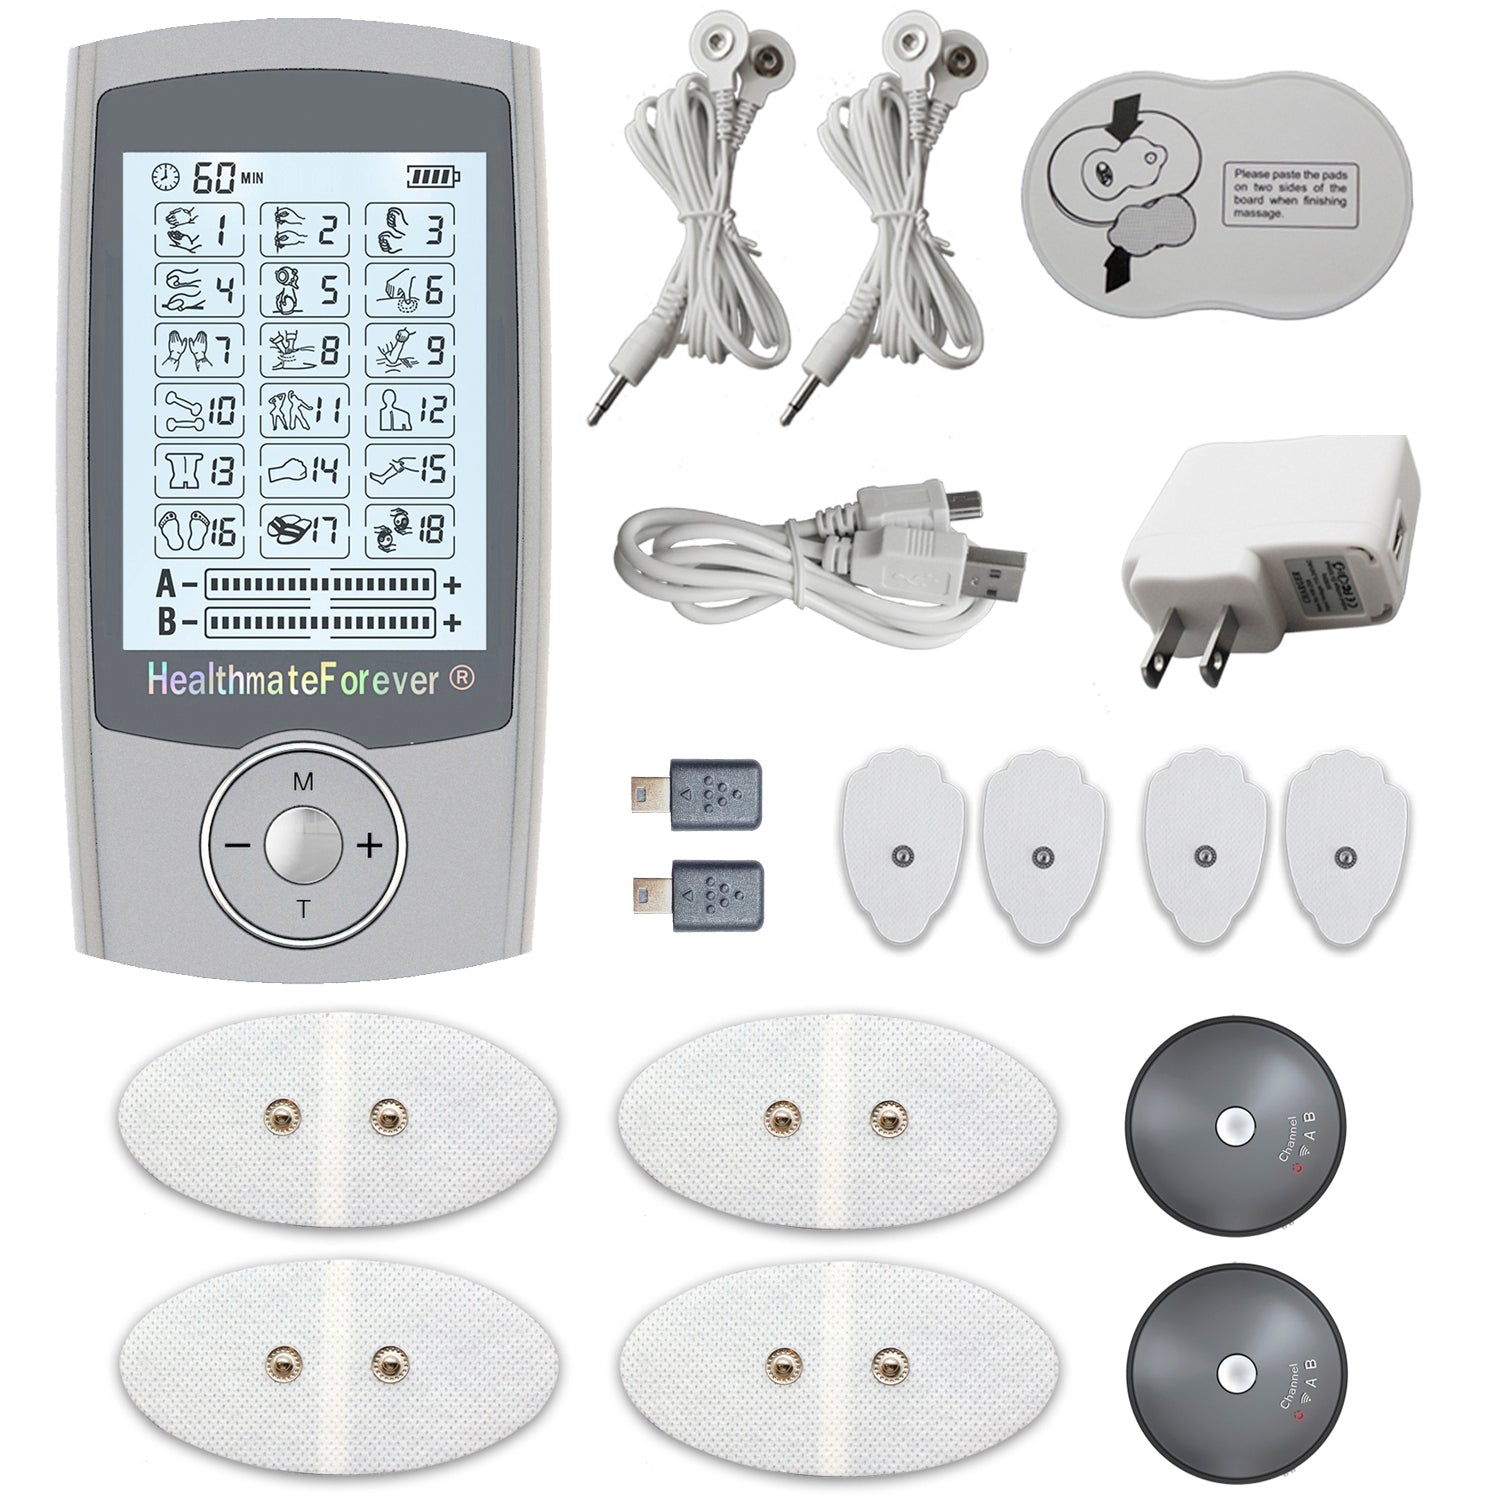 PRO18AB Pain Relief TENS Unit & Muscle Stimulator - 2 Year Warranty